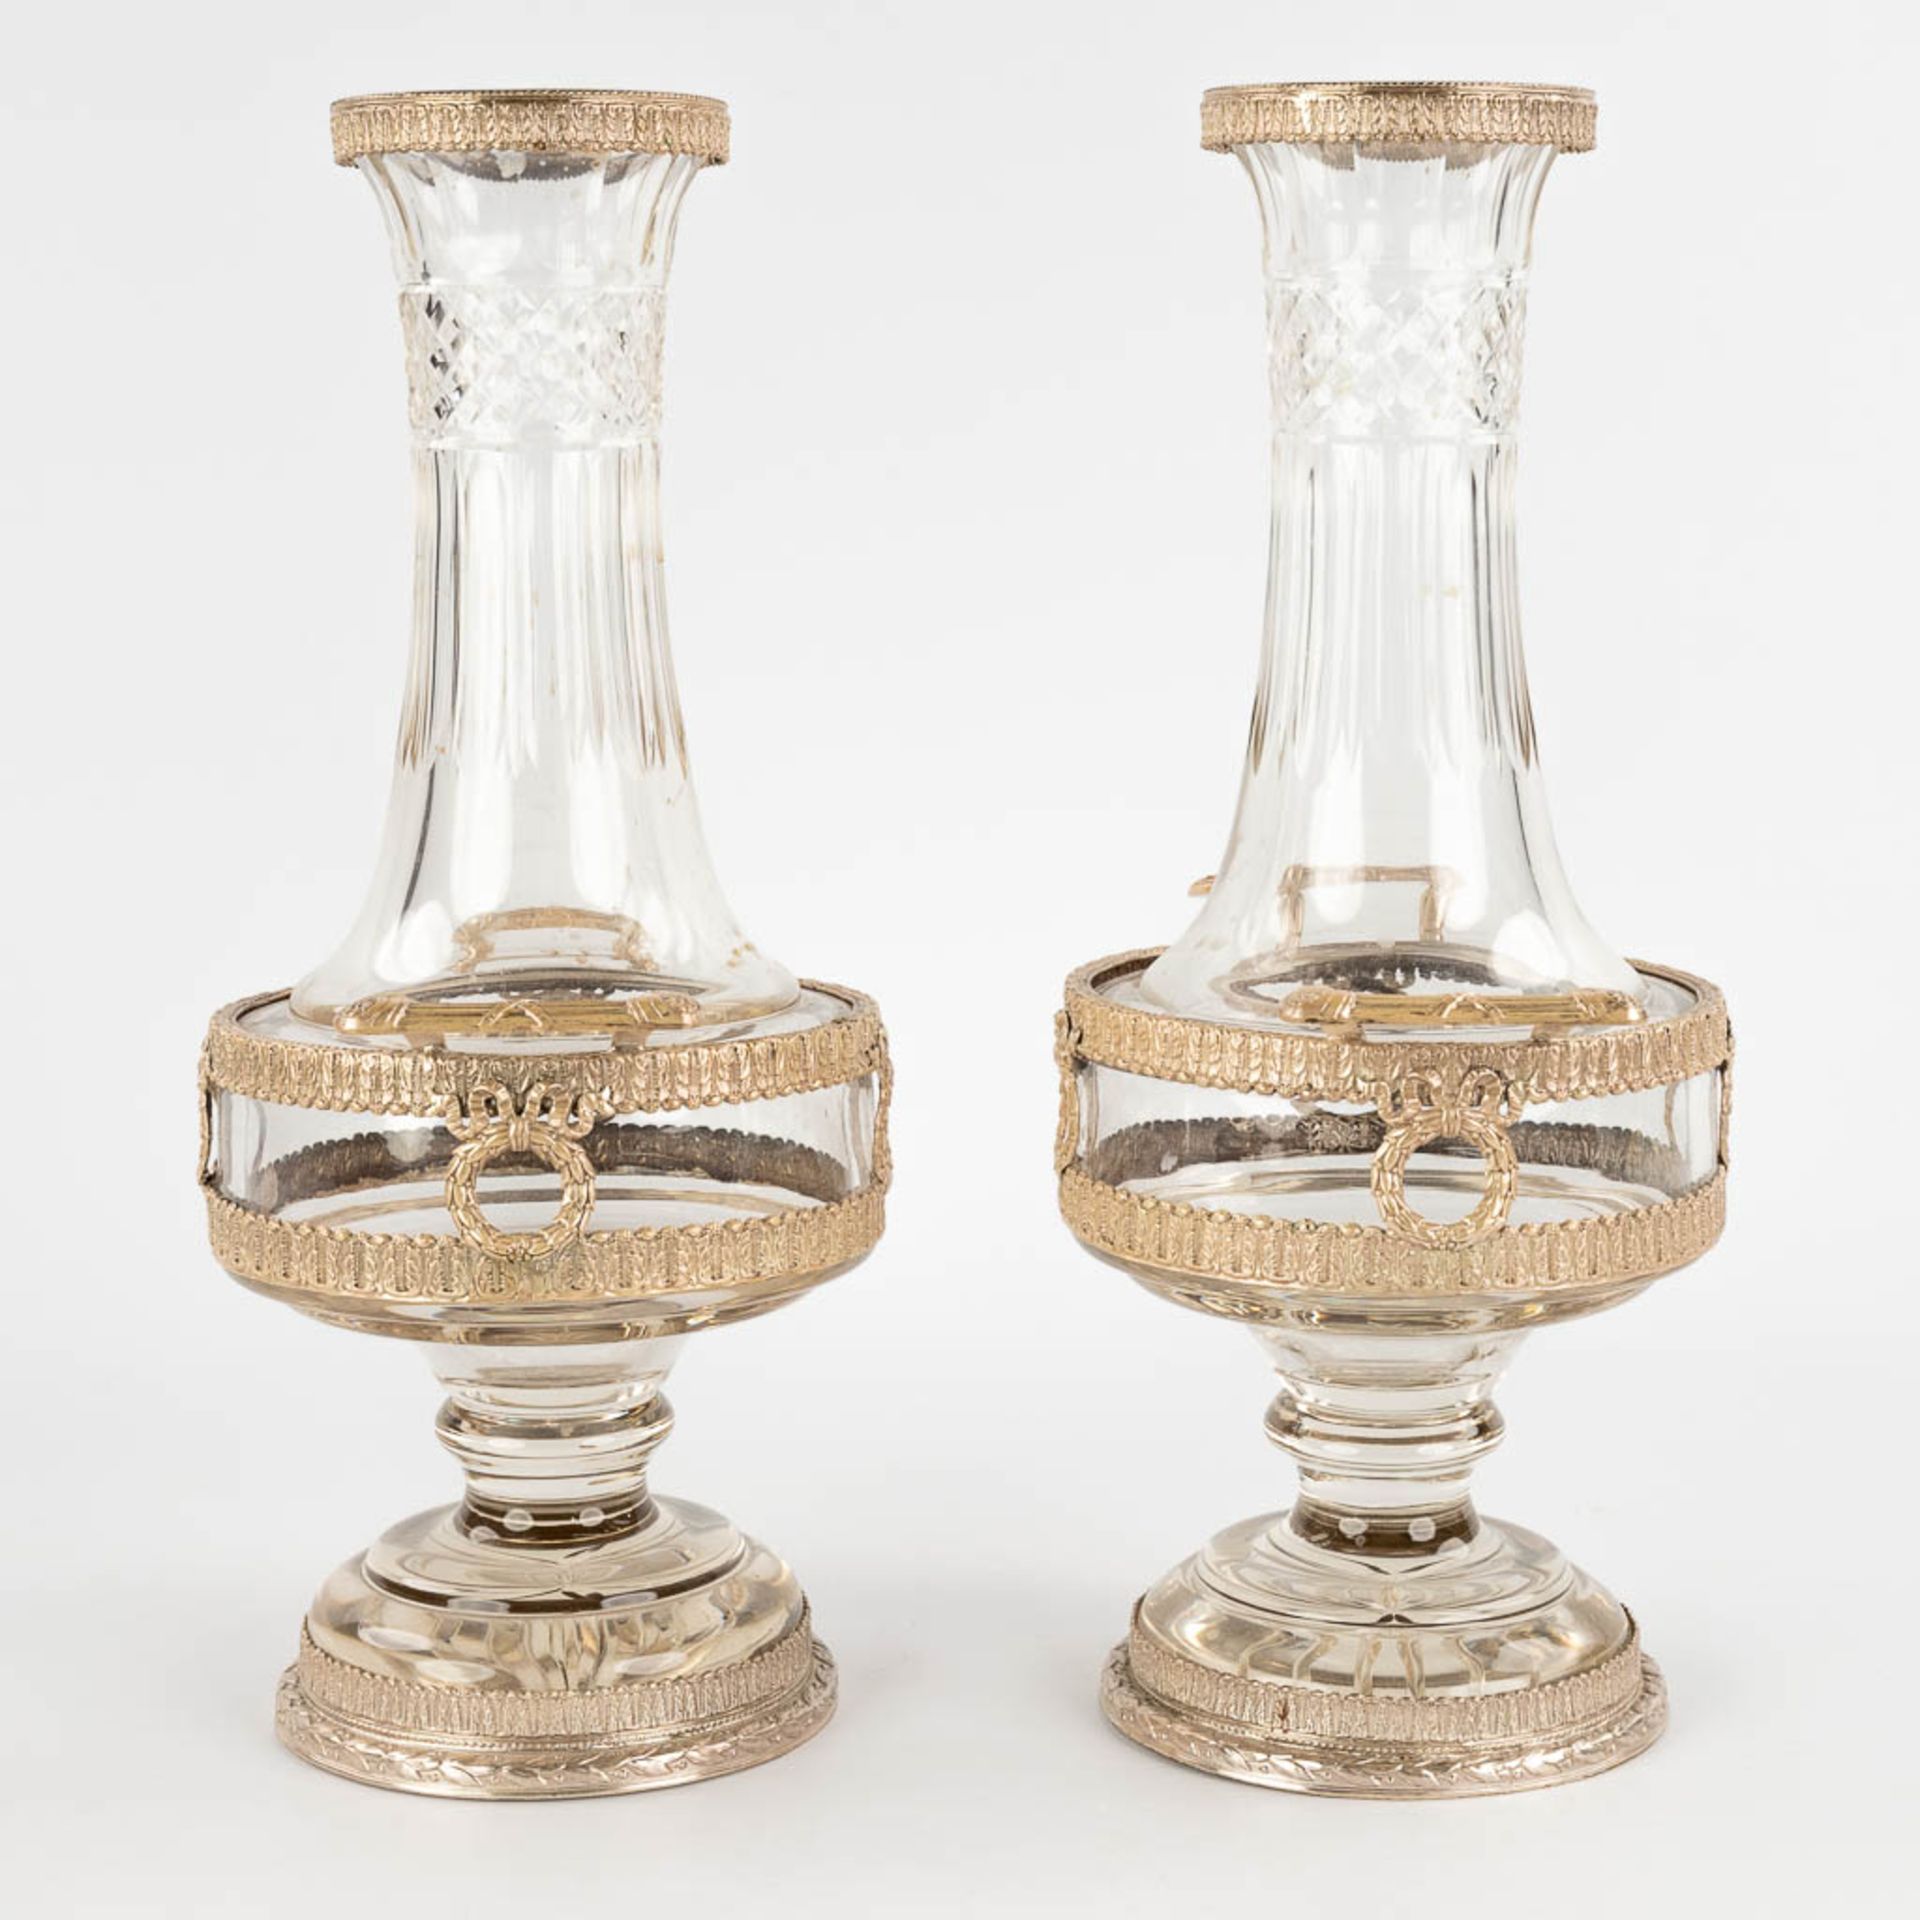 A pair of decorative vases, silver-plated bronze on glass, Neoclassical. 20th C. (D:14 x W:18 x H:33 - Bild 4 aus 16